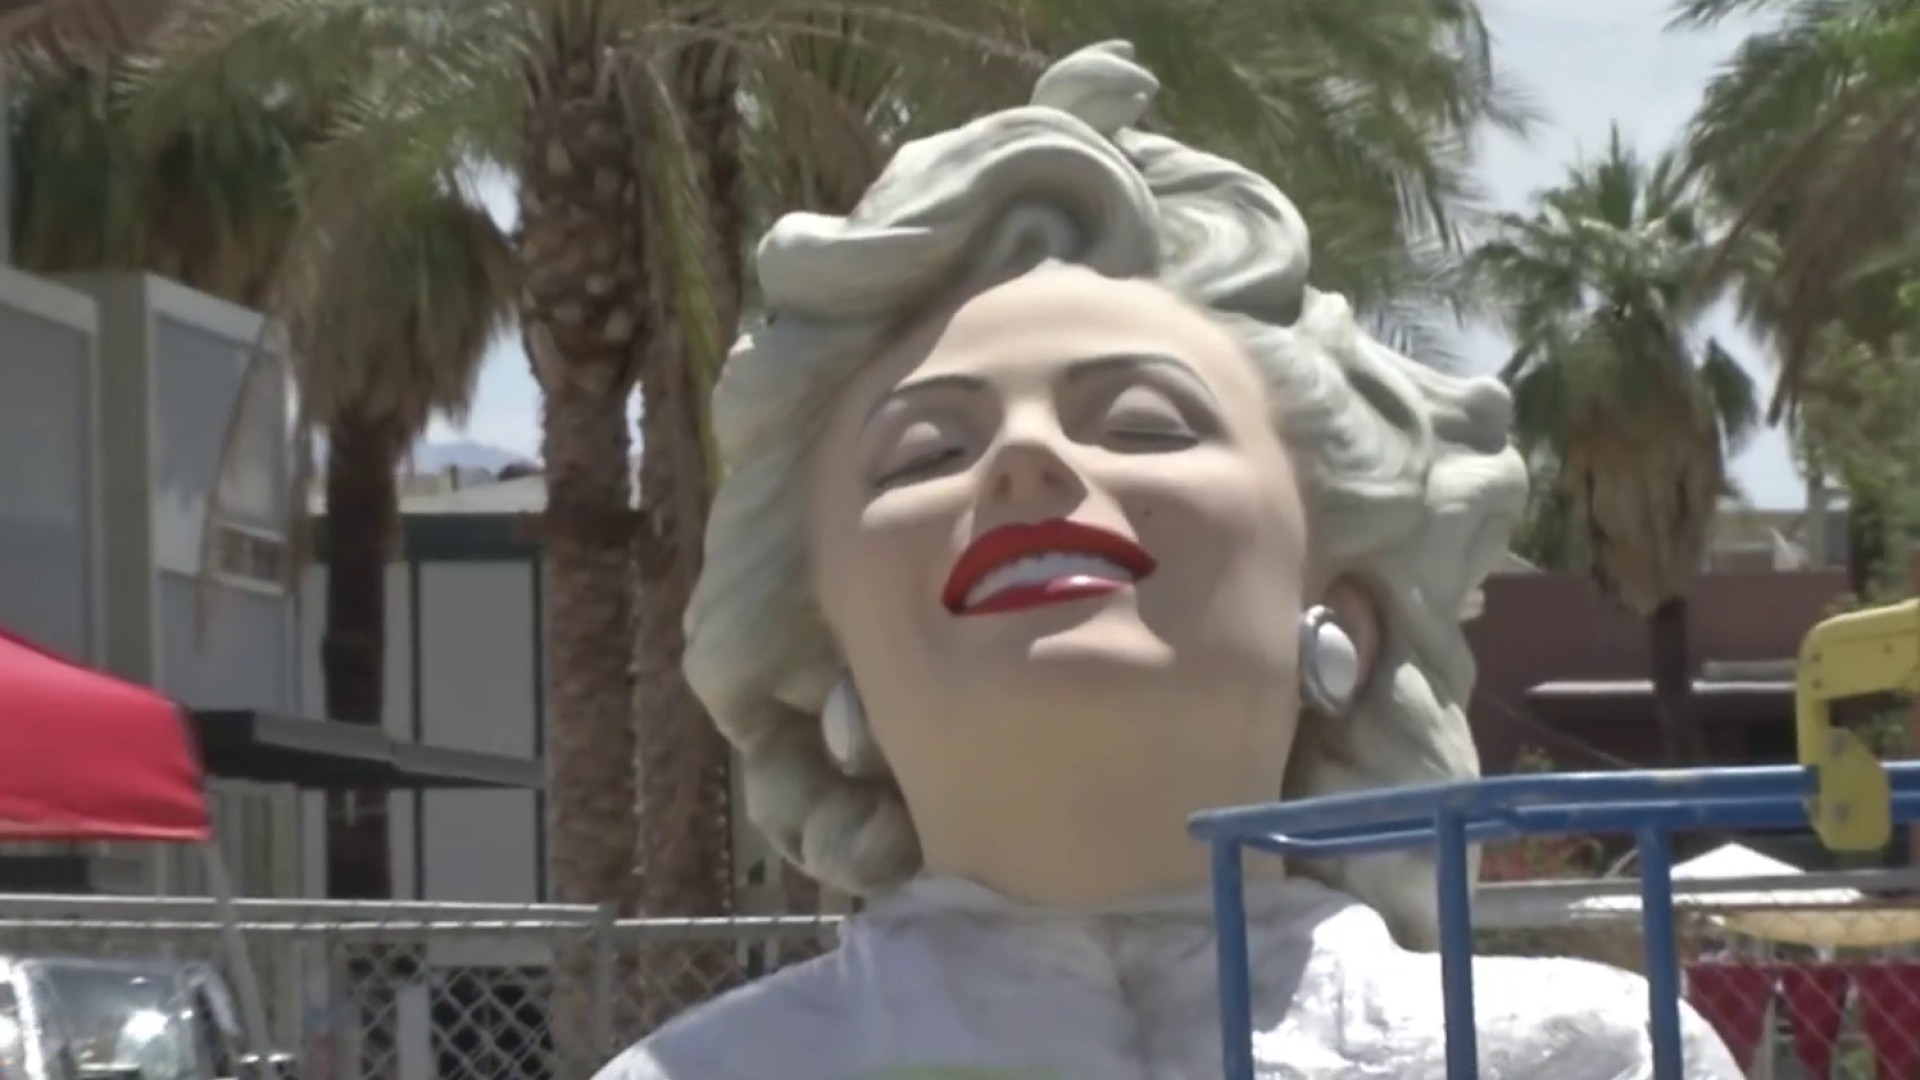 The Marilyn Monroe Statue in Palm Springs - Palm Springs